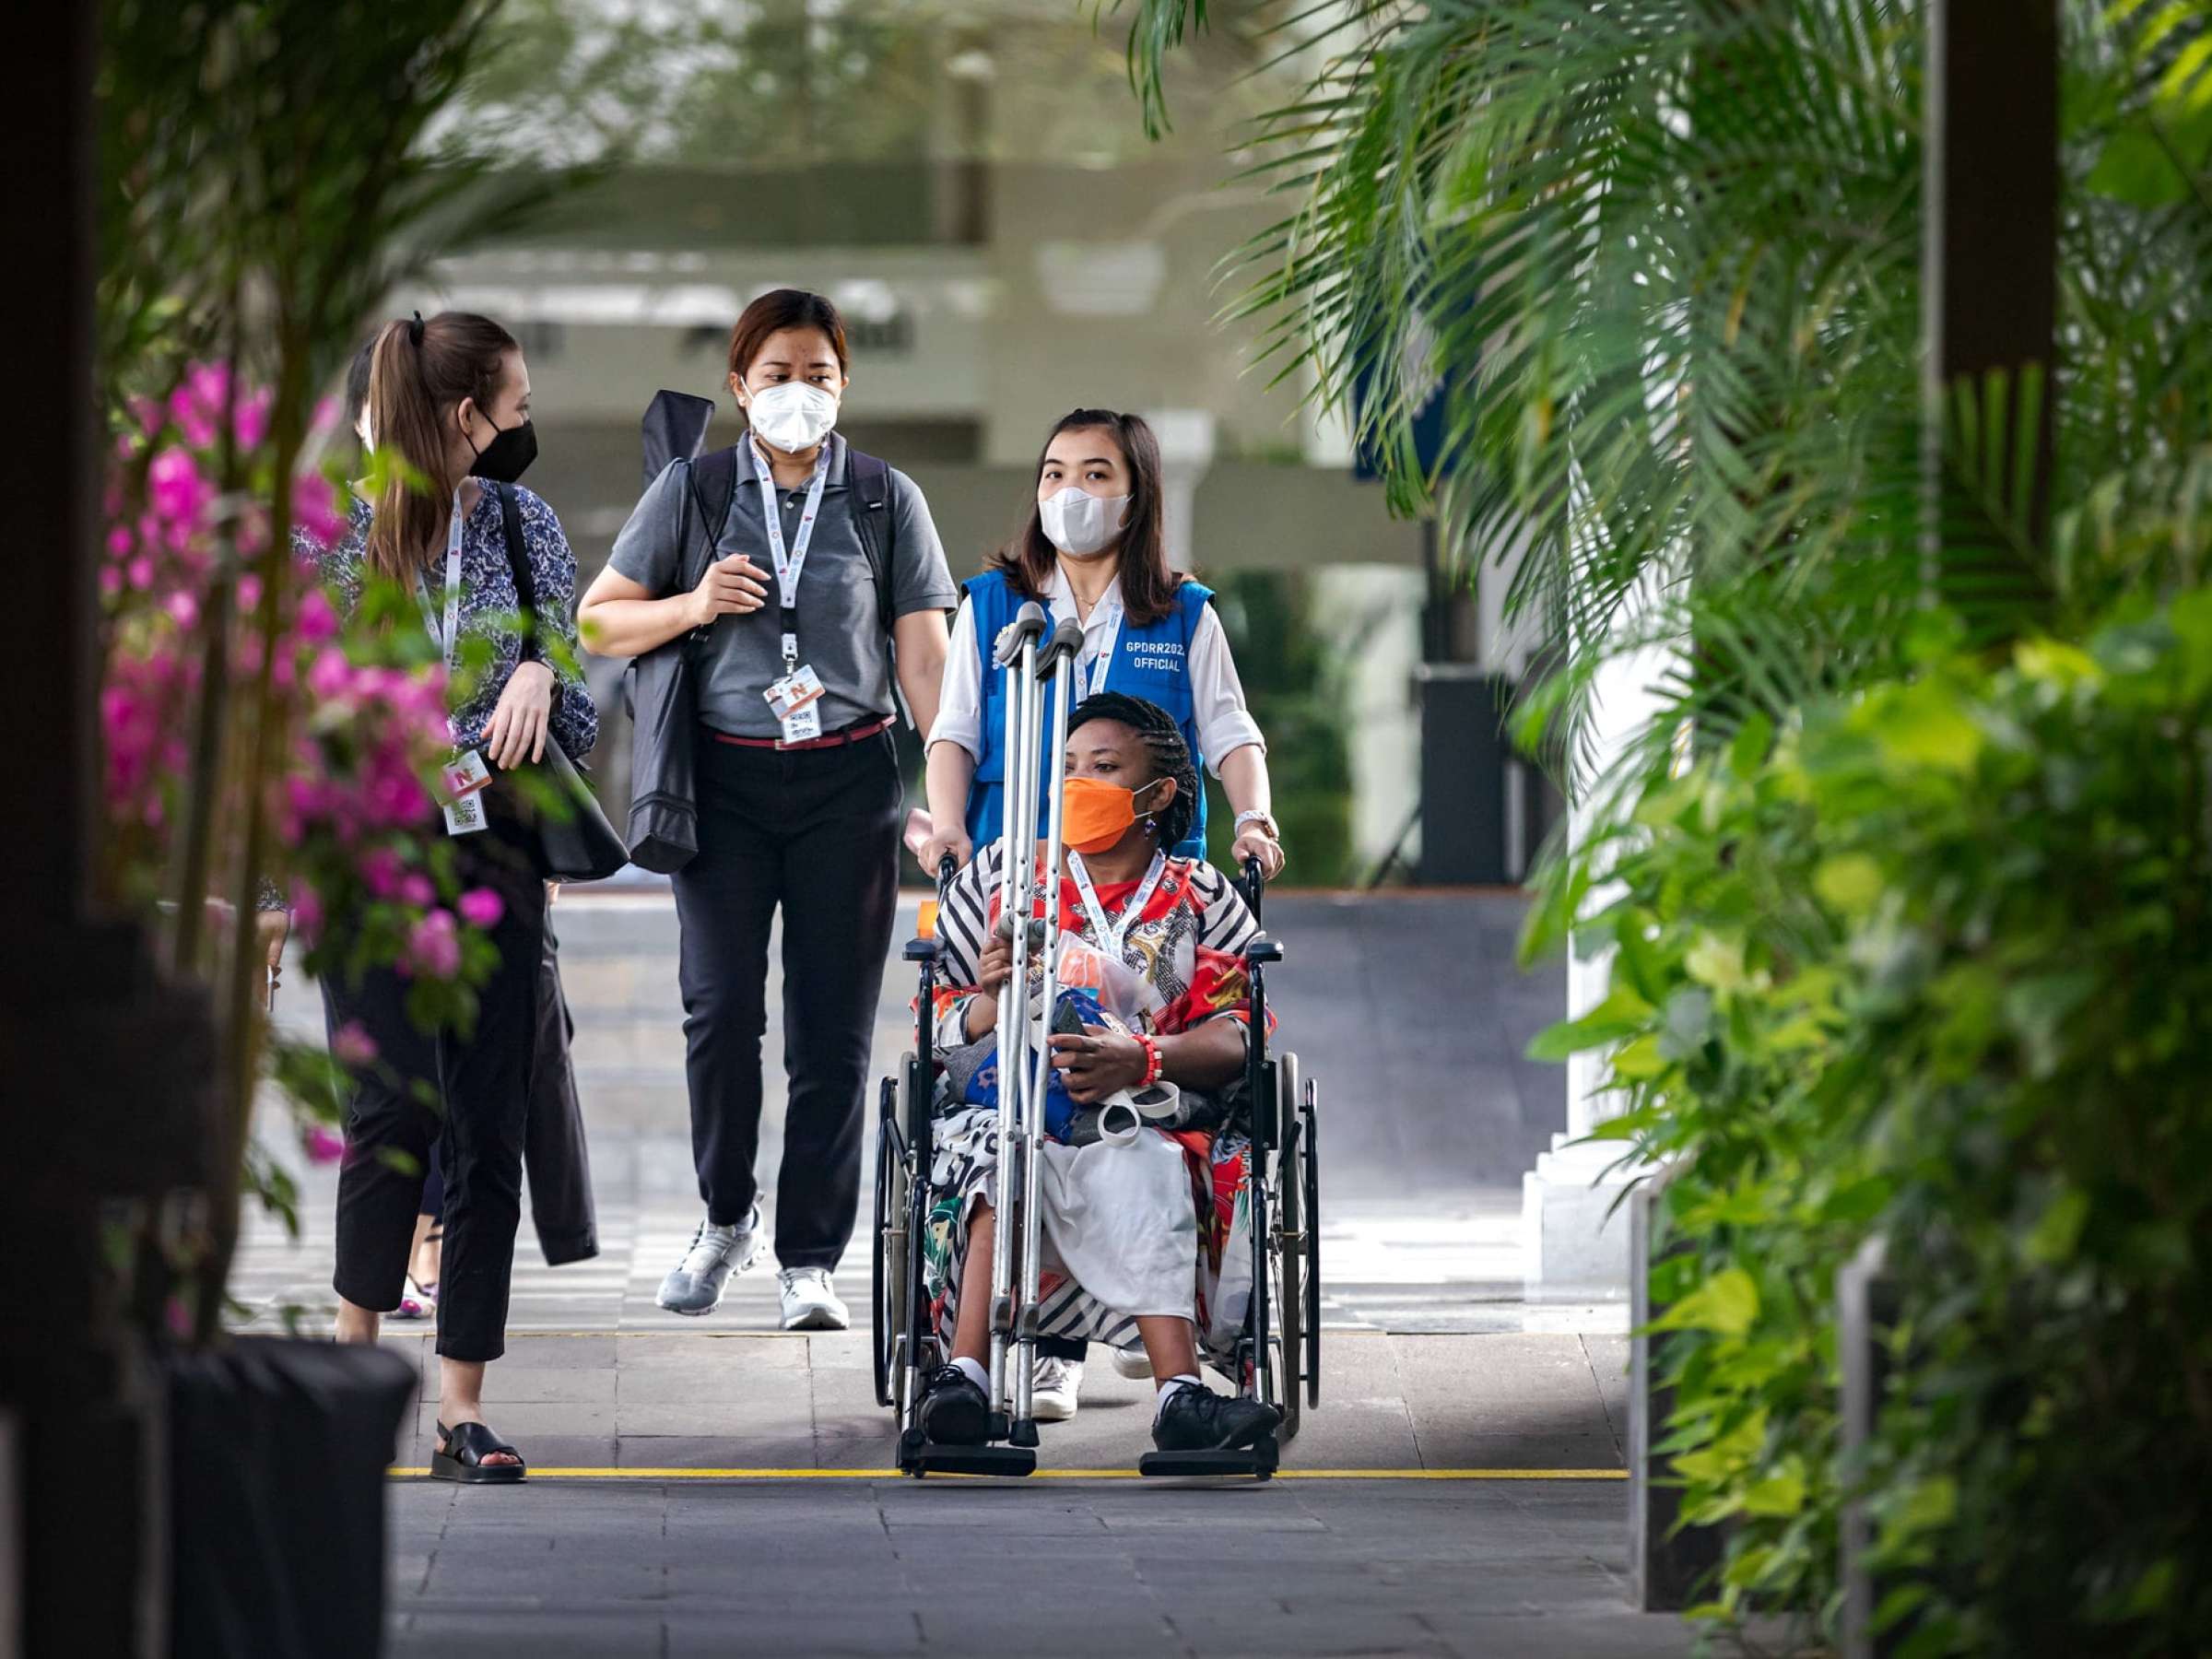 A woman being wheeled in a wheelchair at the 7th Global Platform for Disaster Risk Reduction, 27 May 2022, Bali, Indonesia